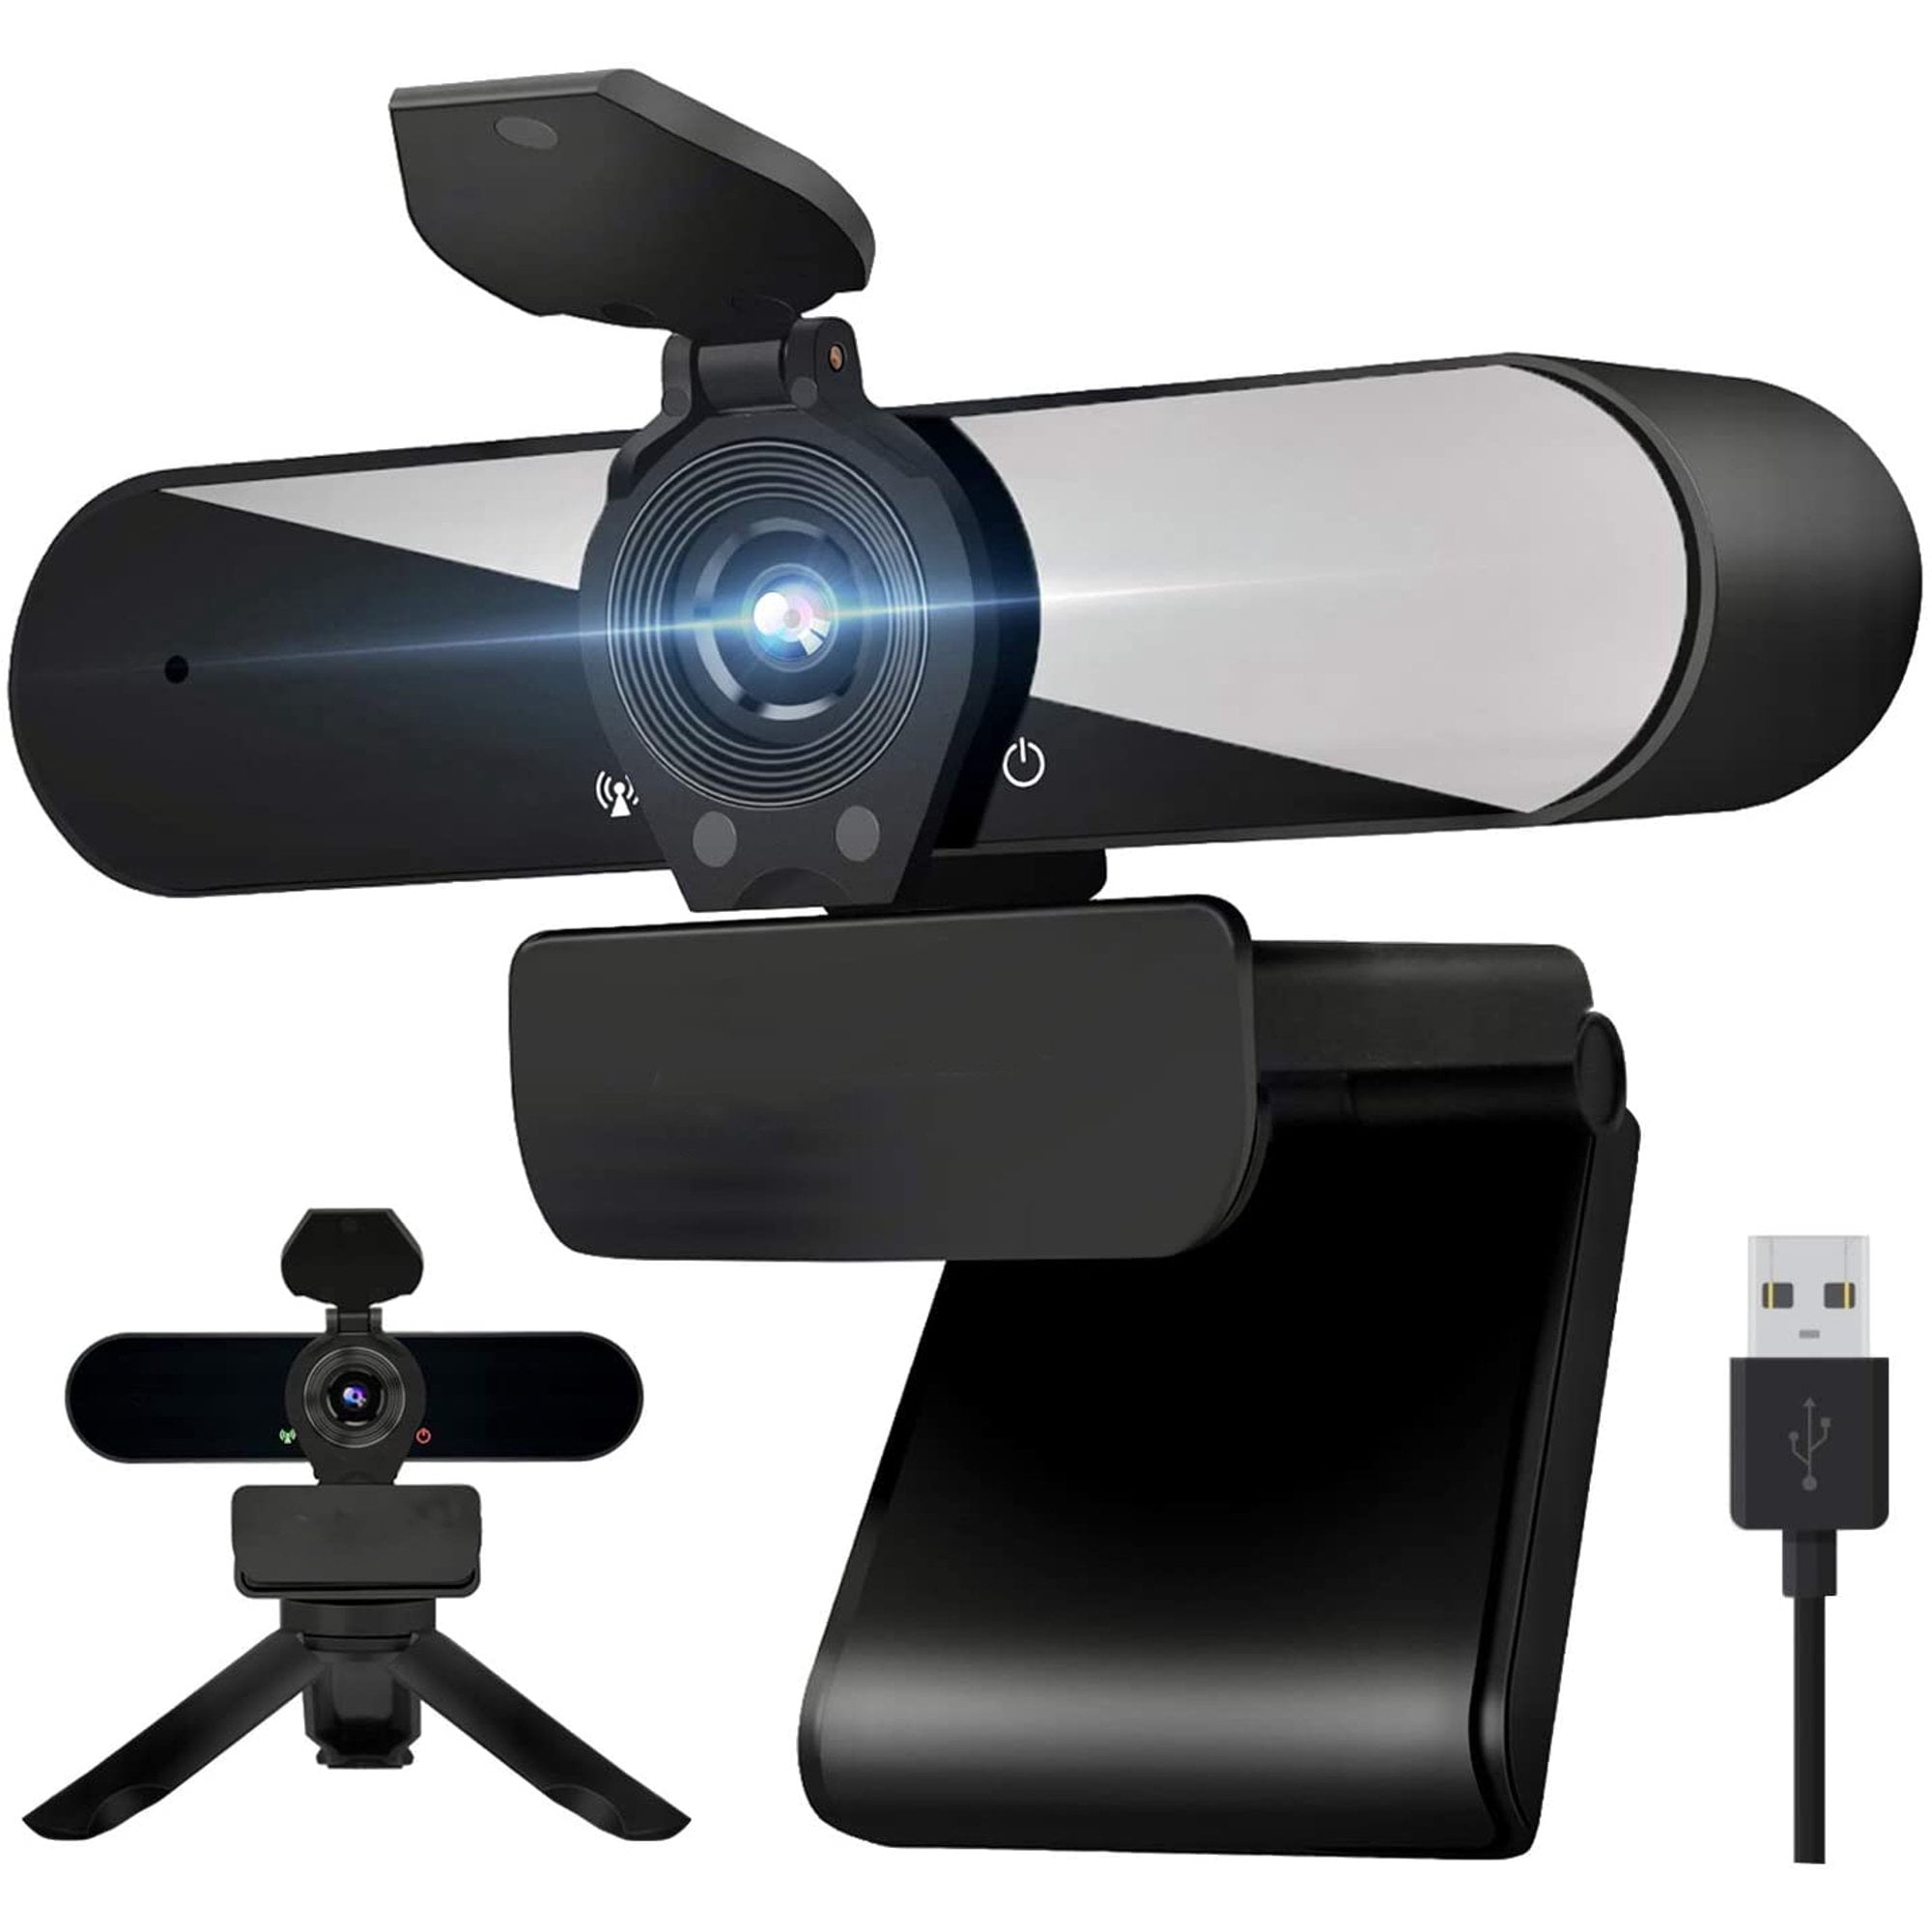 QEBIDUM Computer Camera PC Webcam Full HD 1080p 360 Degrees Wide Angle  30fps Video USB Web Cam with Microphone for Mac Laptop Desktop Conferencing